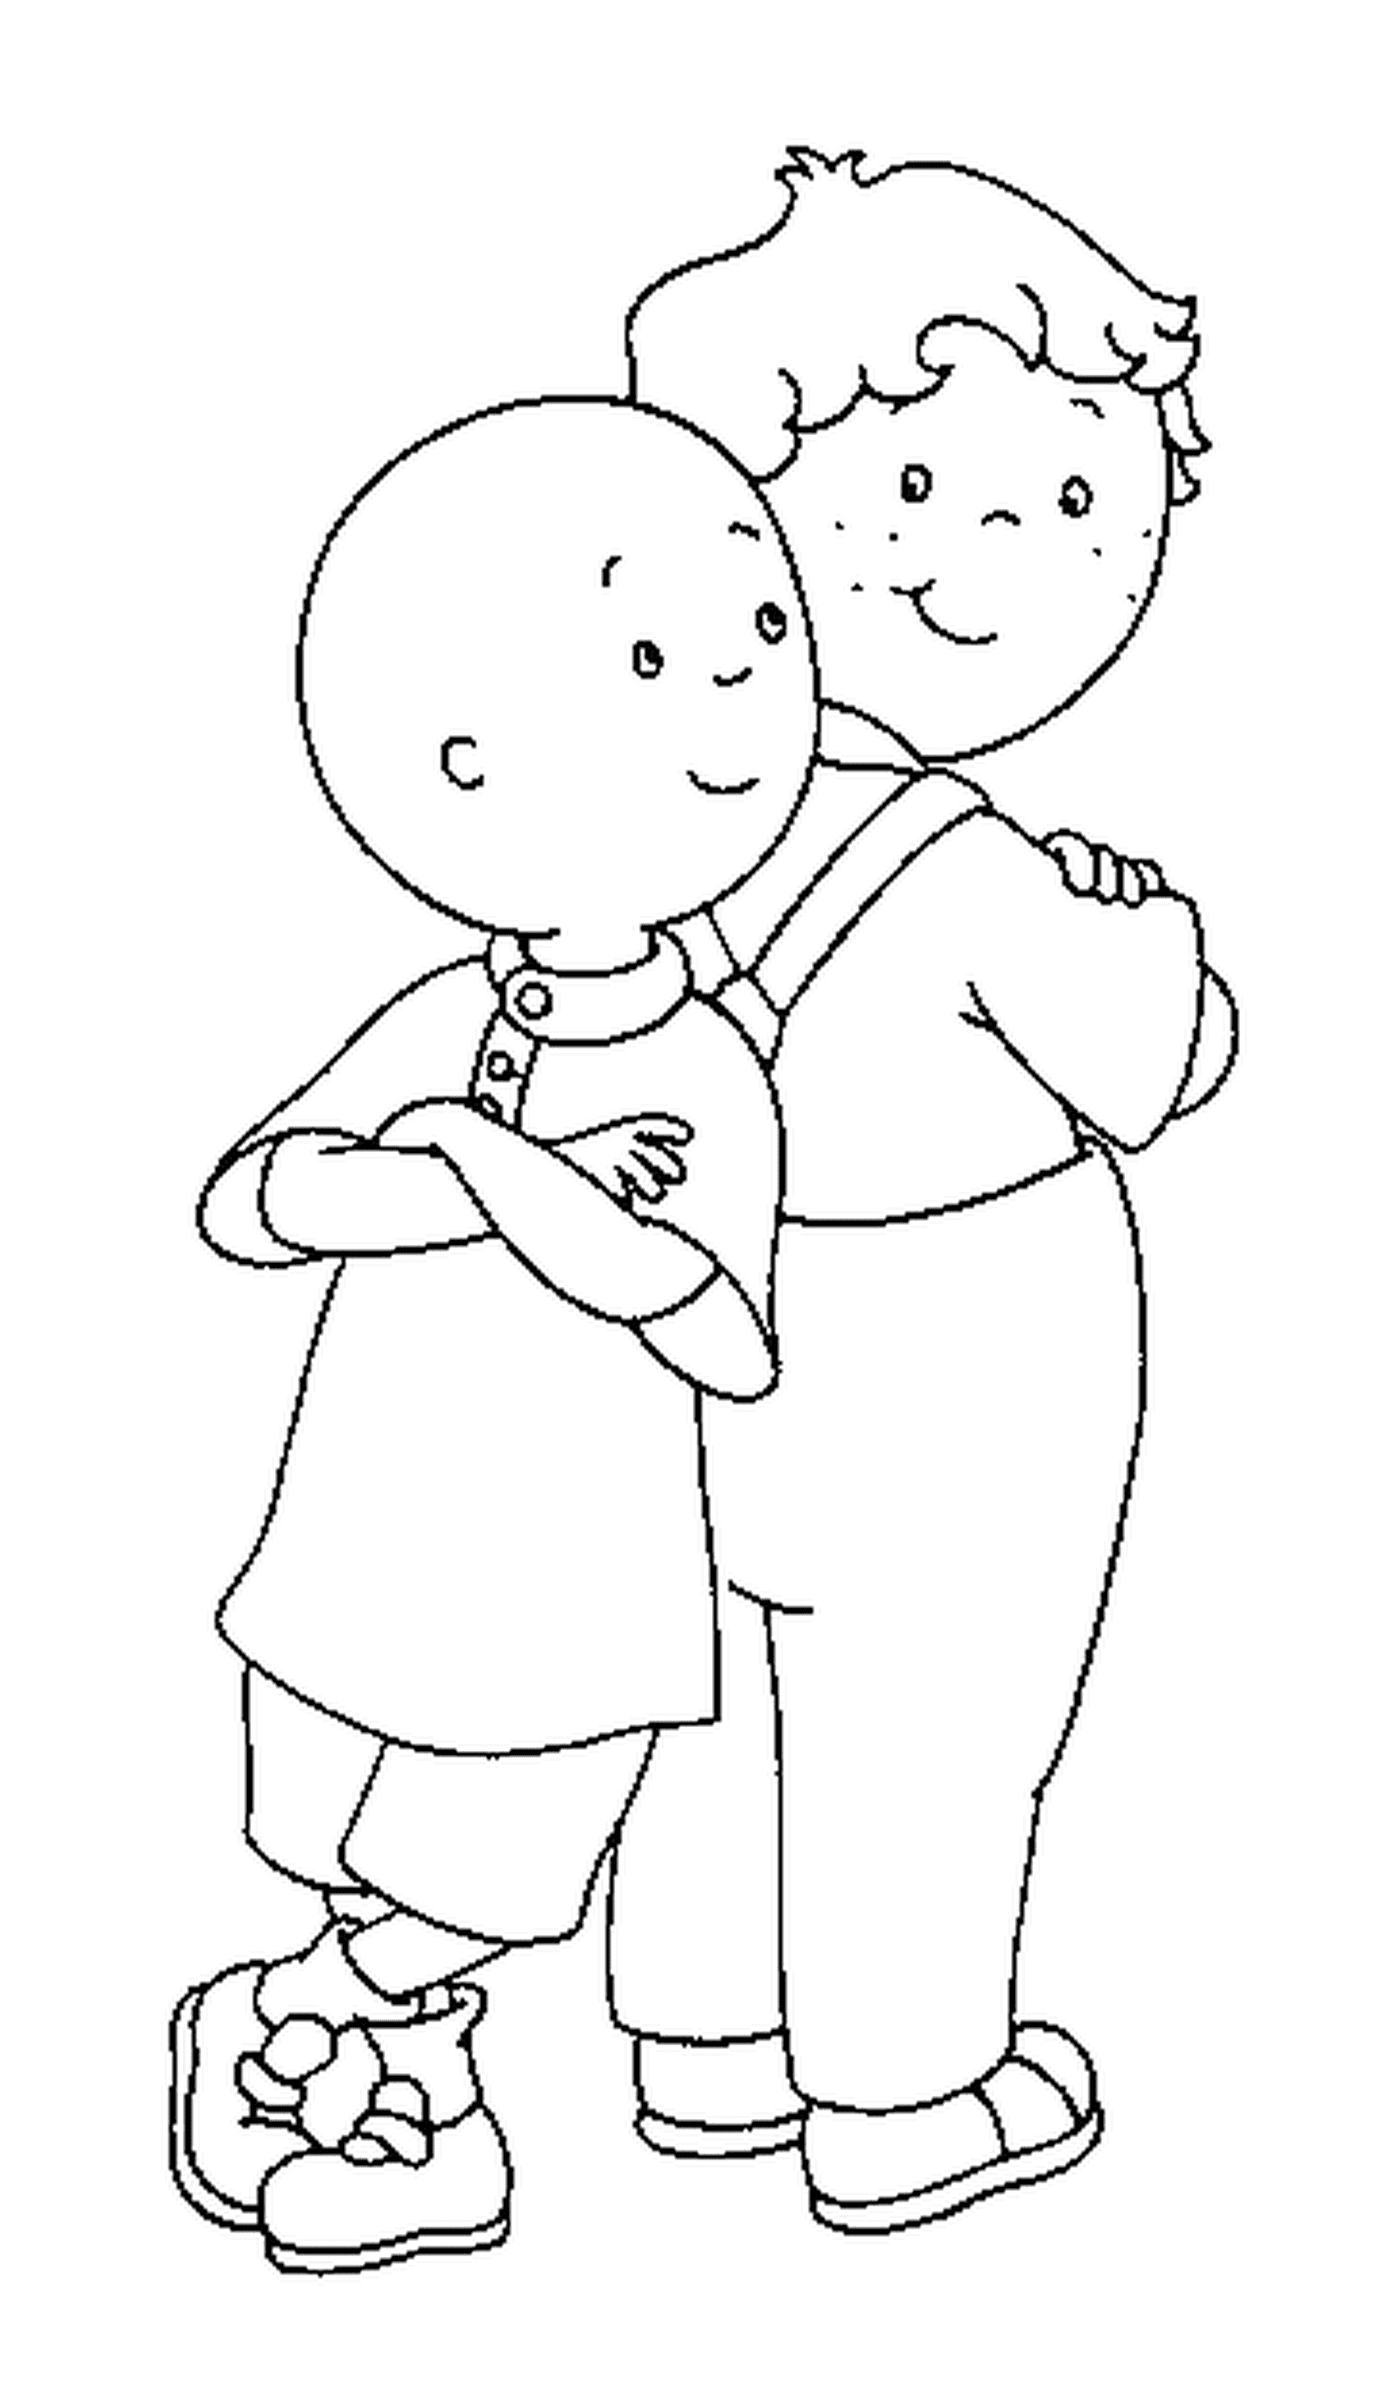  Caillou and Leo, the best friends in the world 